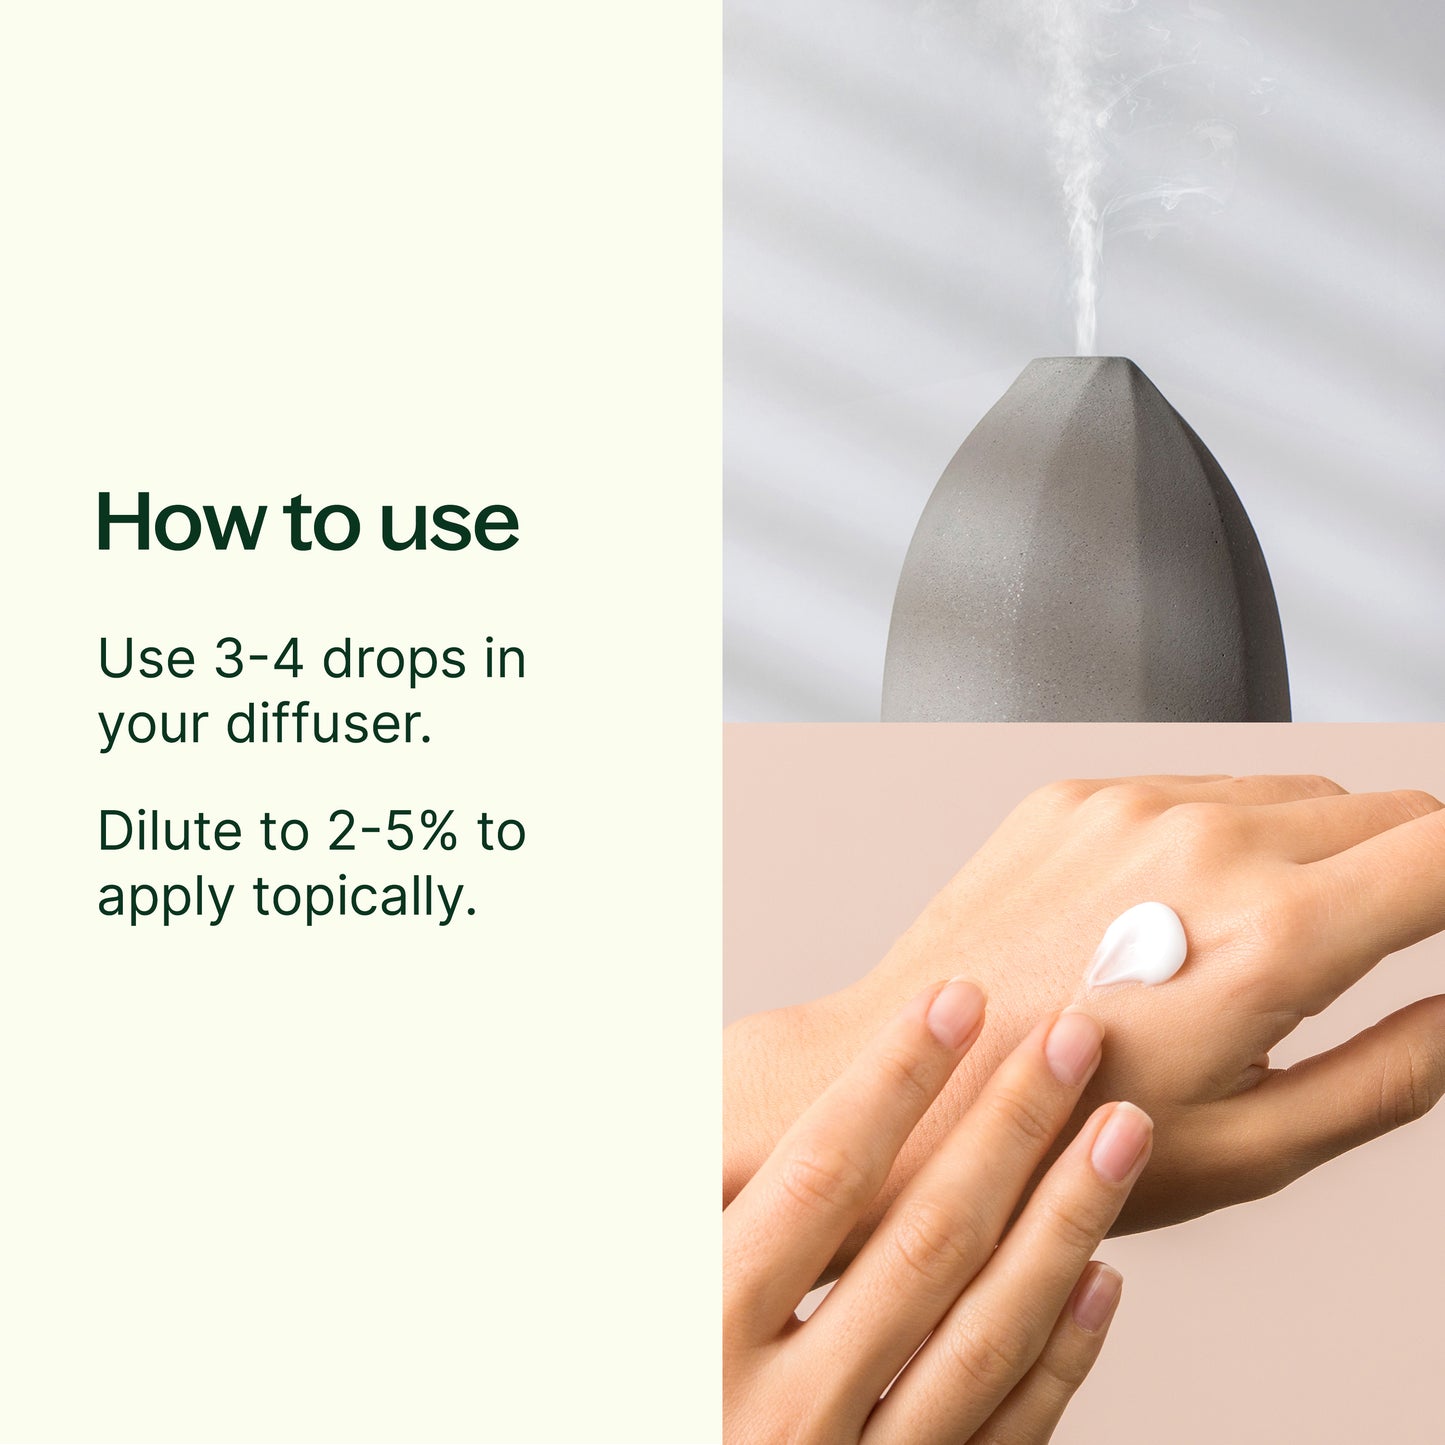 How to Use Organic Bergamot Essential Oil: Use 3-4 drops in your diffuser or dilute to 2-5% to apply topically